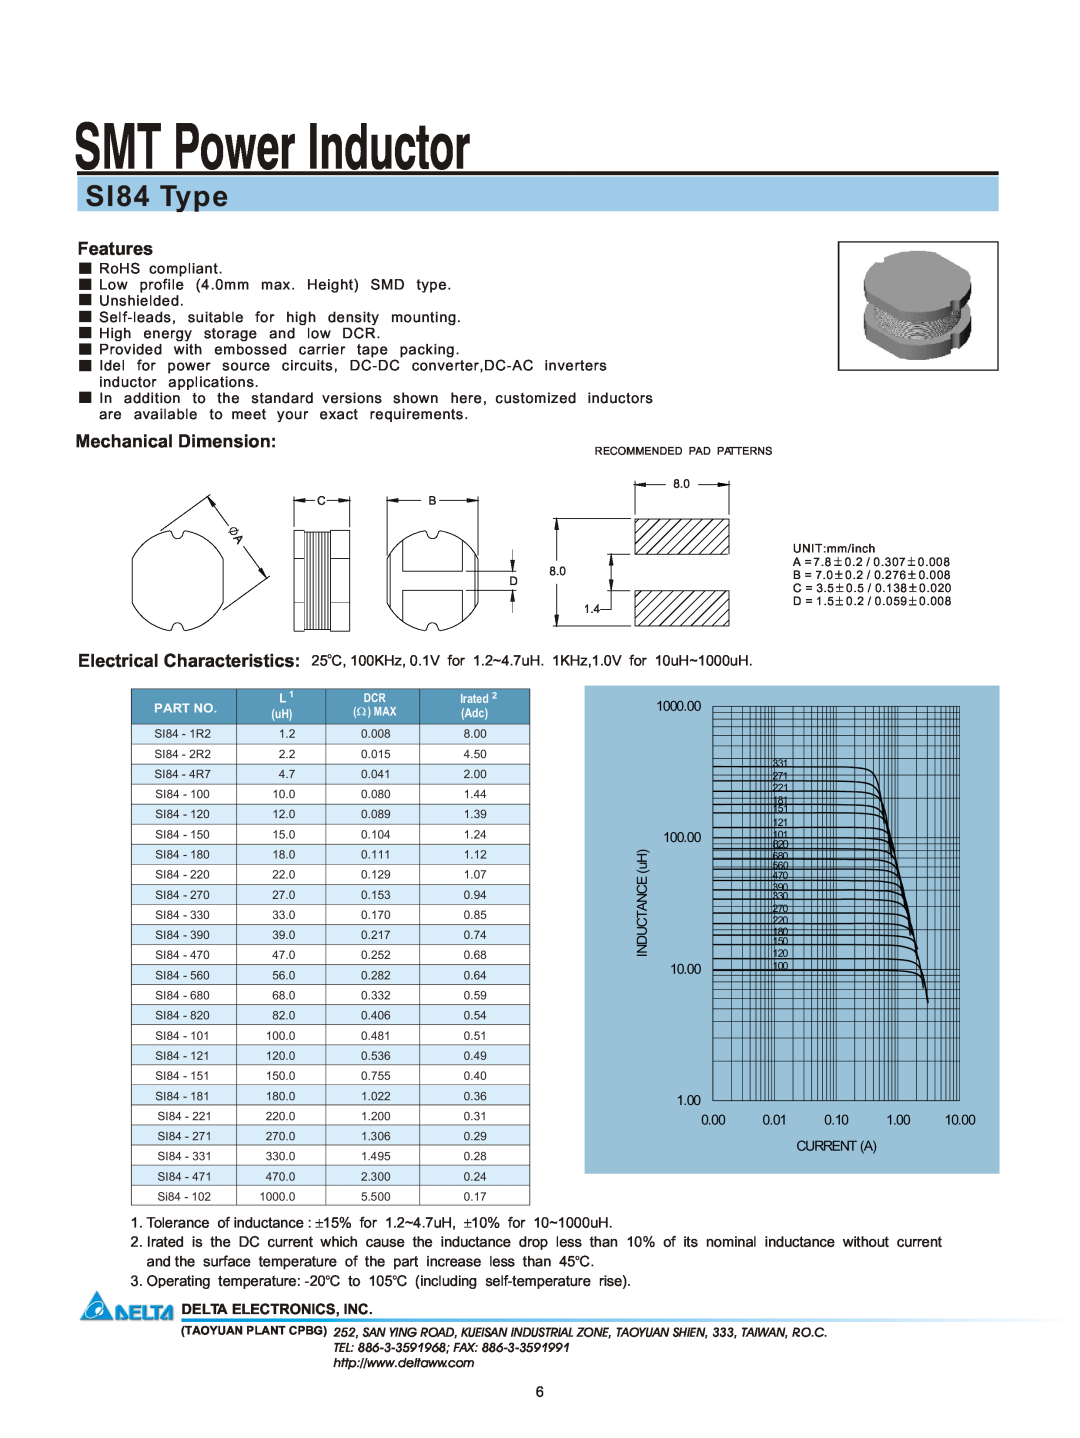 Delta Electronics manual SMT Power Inductor, SI84 Type, Features, Mechanical Dimension, Delta Electronics, Inc 